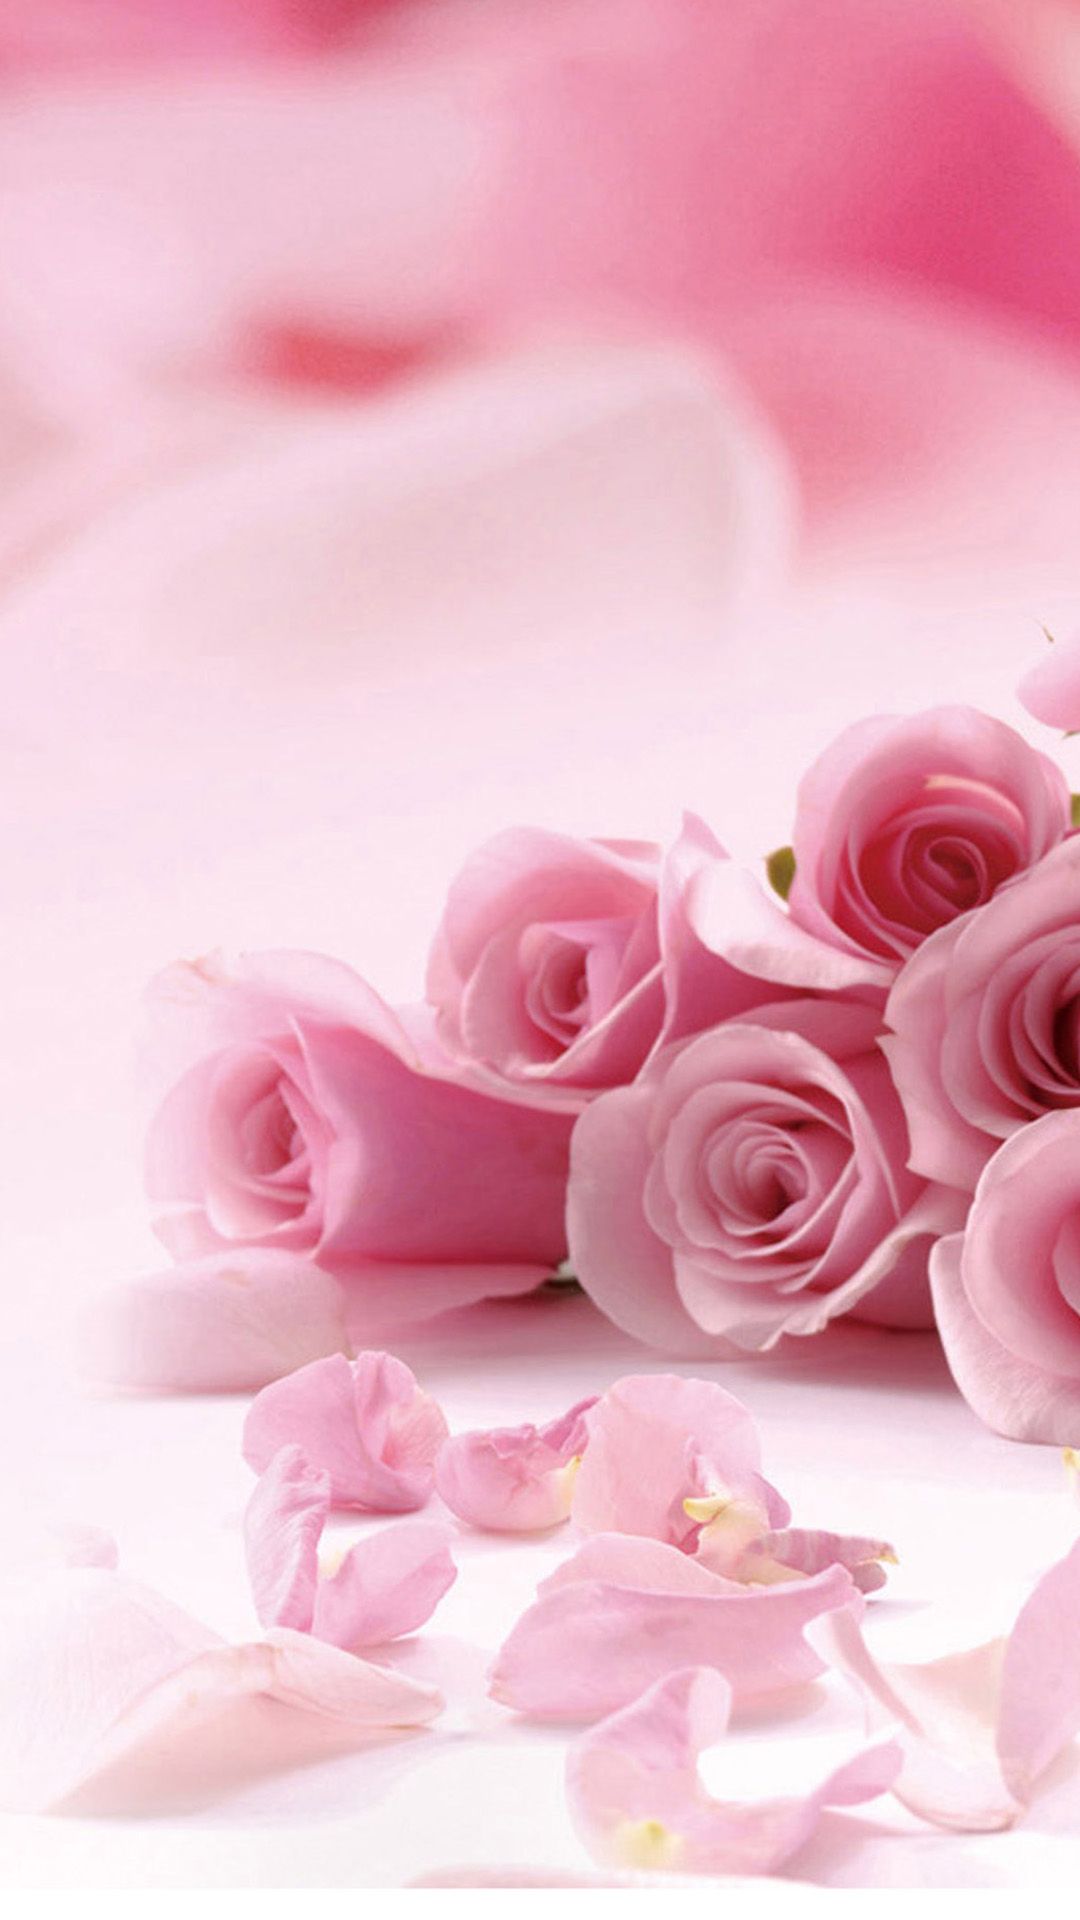 Wallpaper With Pink Roses And Petals For iPhone Flower